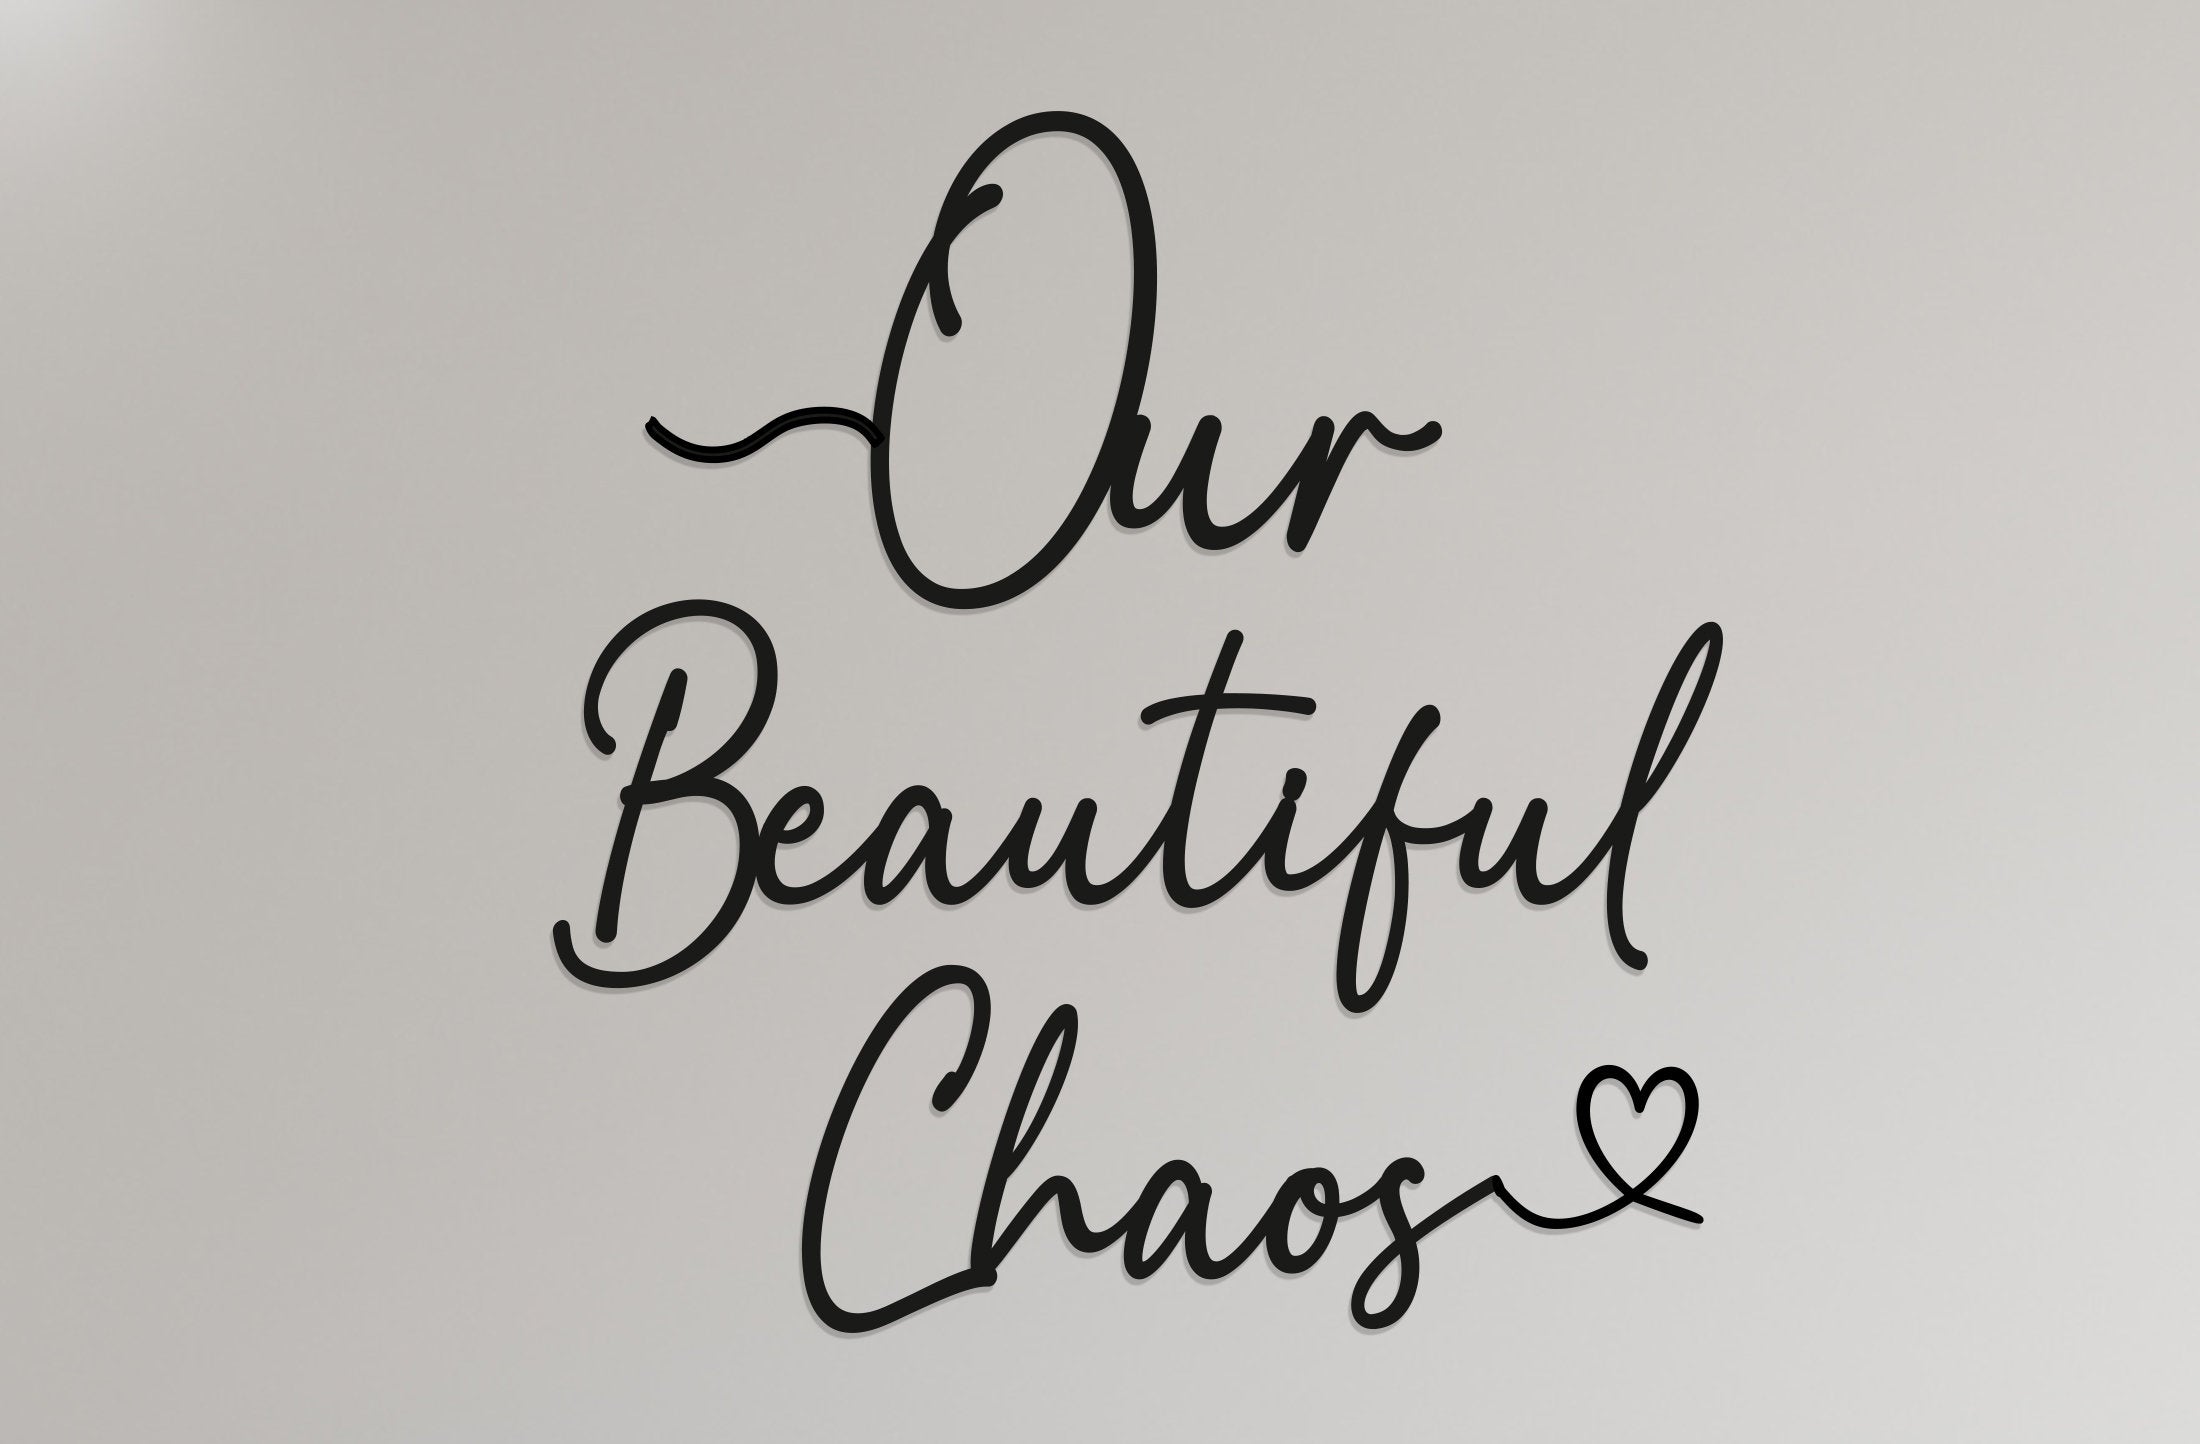 Our Beautiful Chaos - Family Art - Wooden Word Text Art - Art Gift - Bespoke Wall Words - Wall Quotes & Sayings - Square Font 1